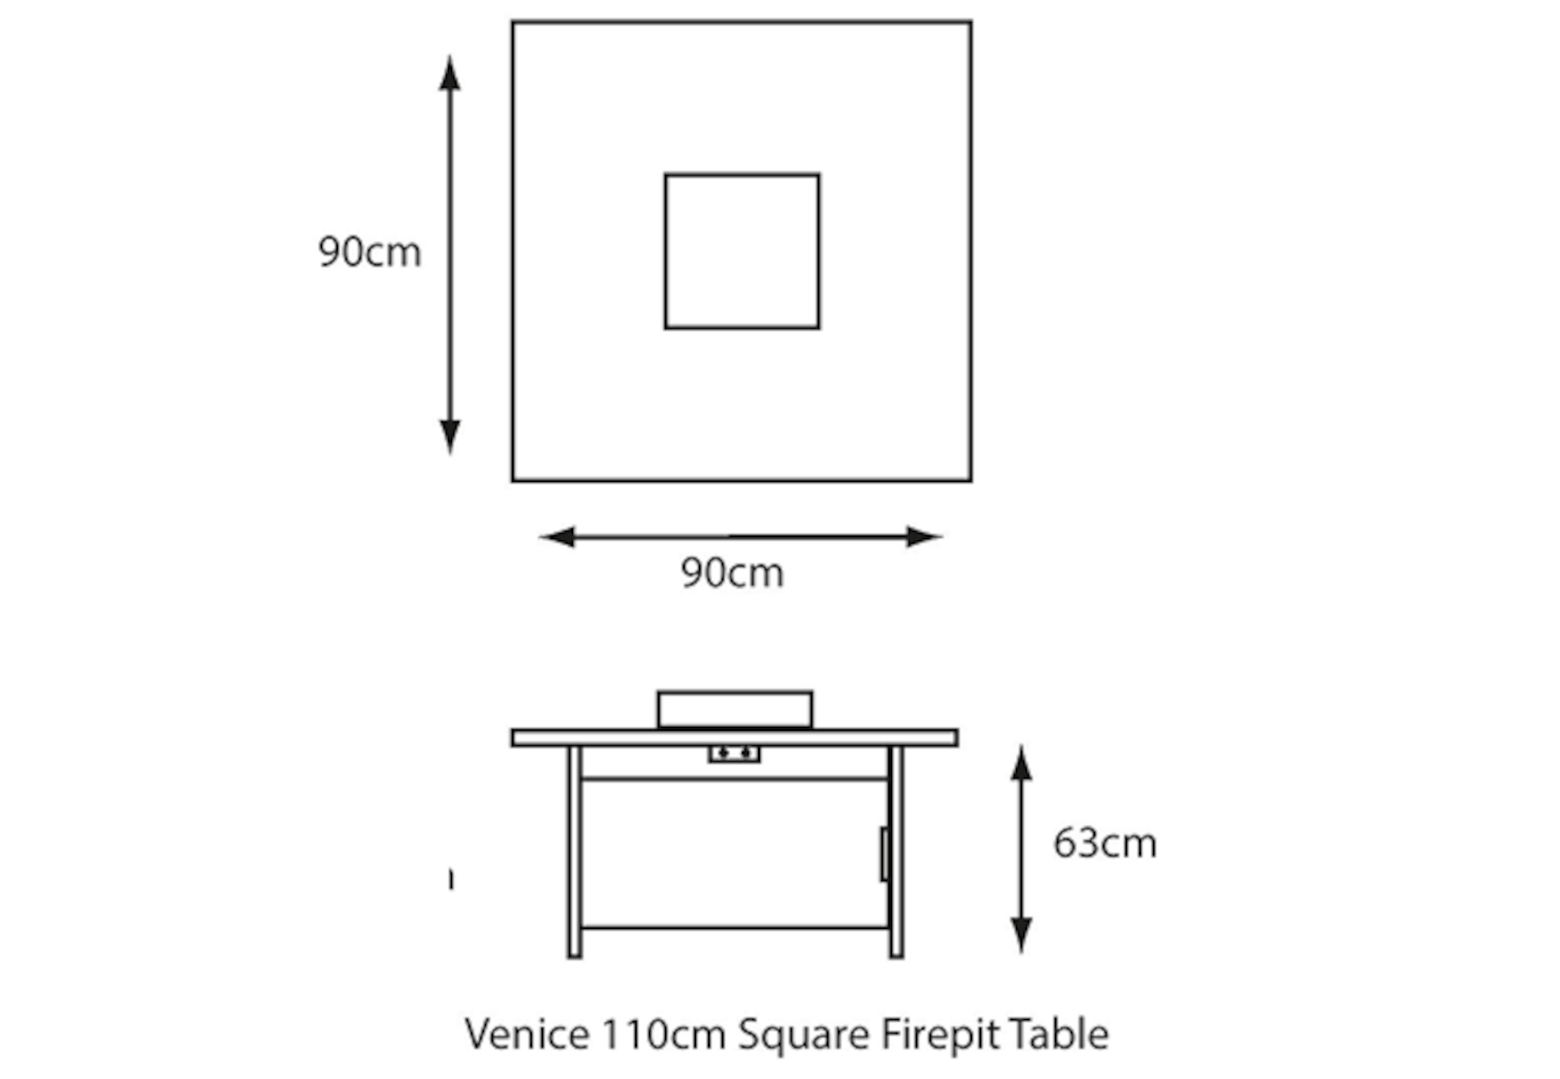 Fire Pit Table - dimensions image